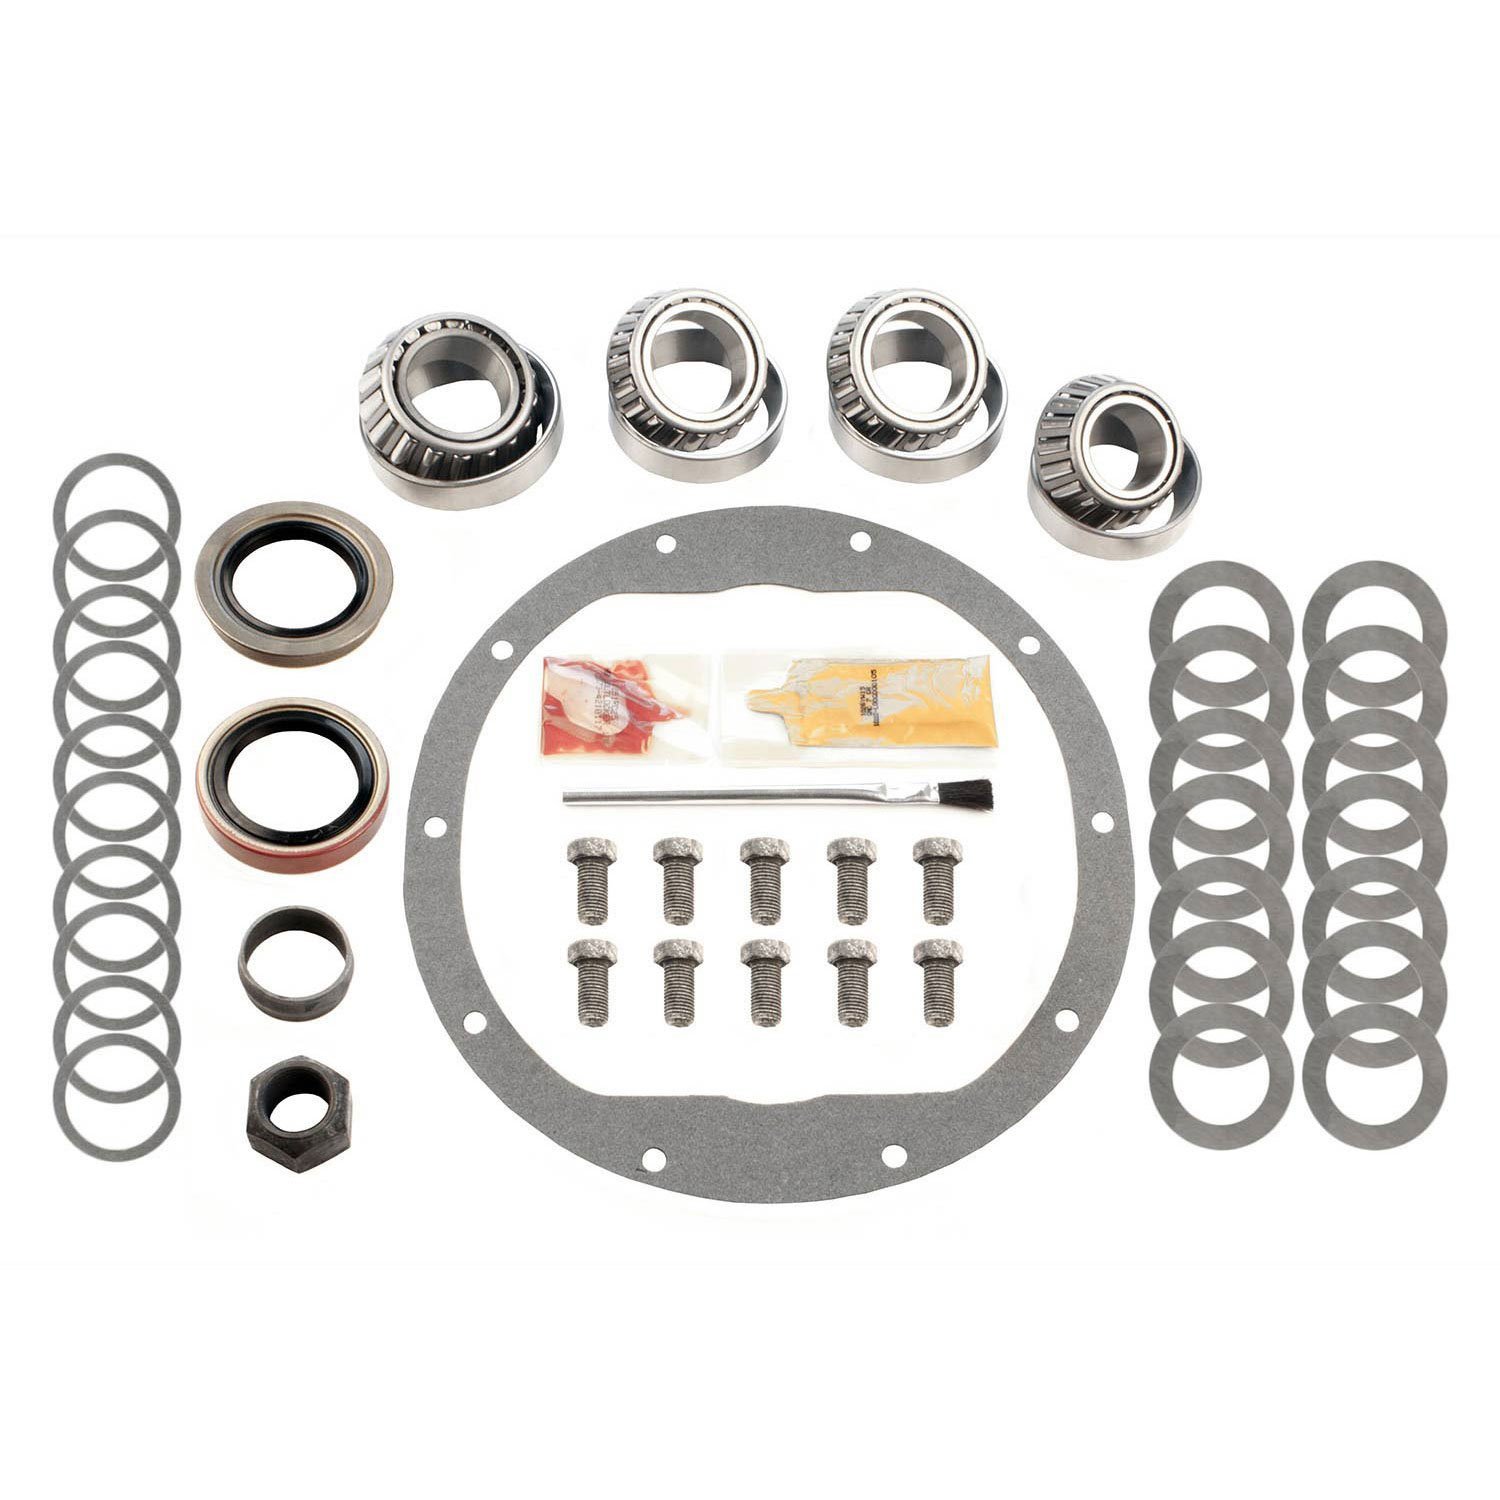 Differential Complete Kit 8.5" 10 Bolt